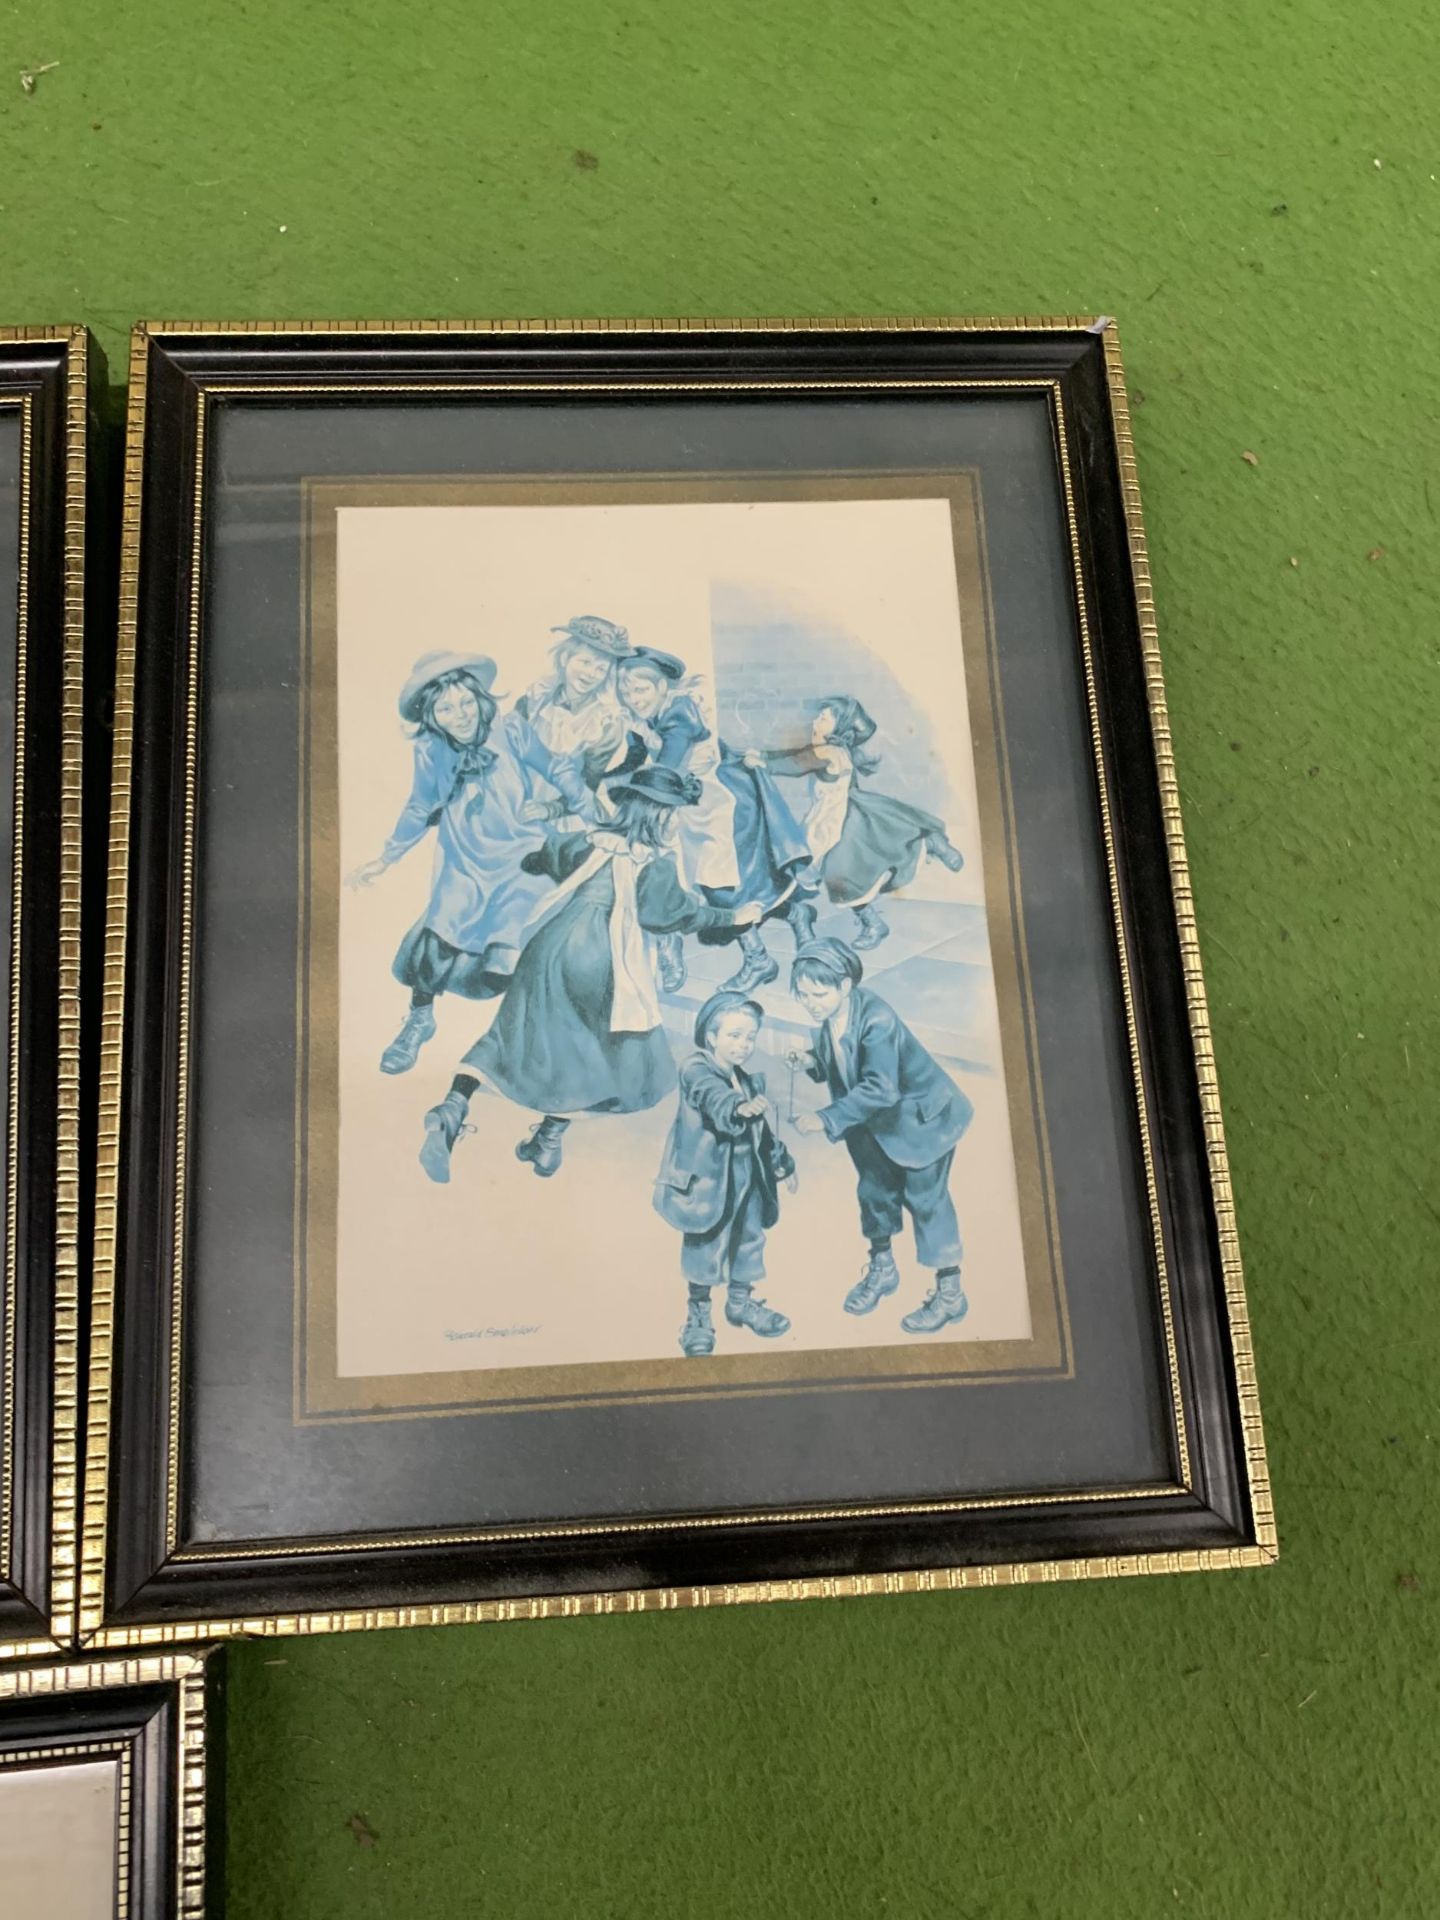 FOUR FRAMED PRINTS BY GERALD EMBLETON DEPICTING VICTORIAN PLAYGROUND DAYS - Image 5 of 5